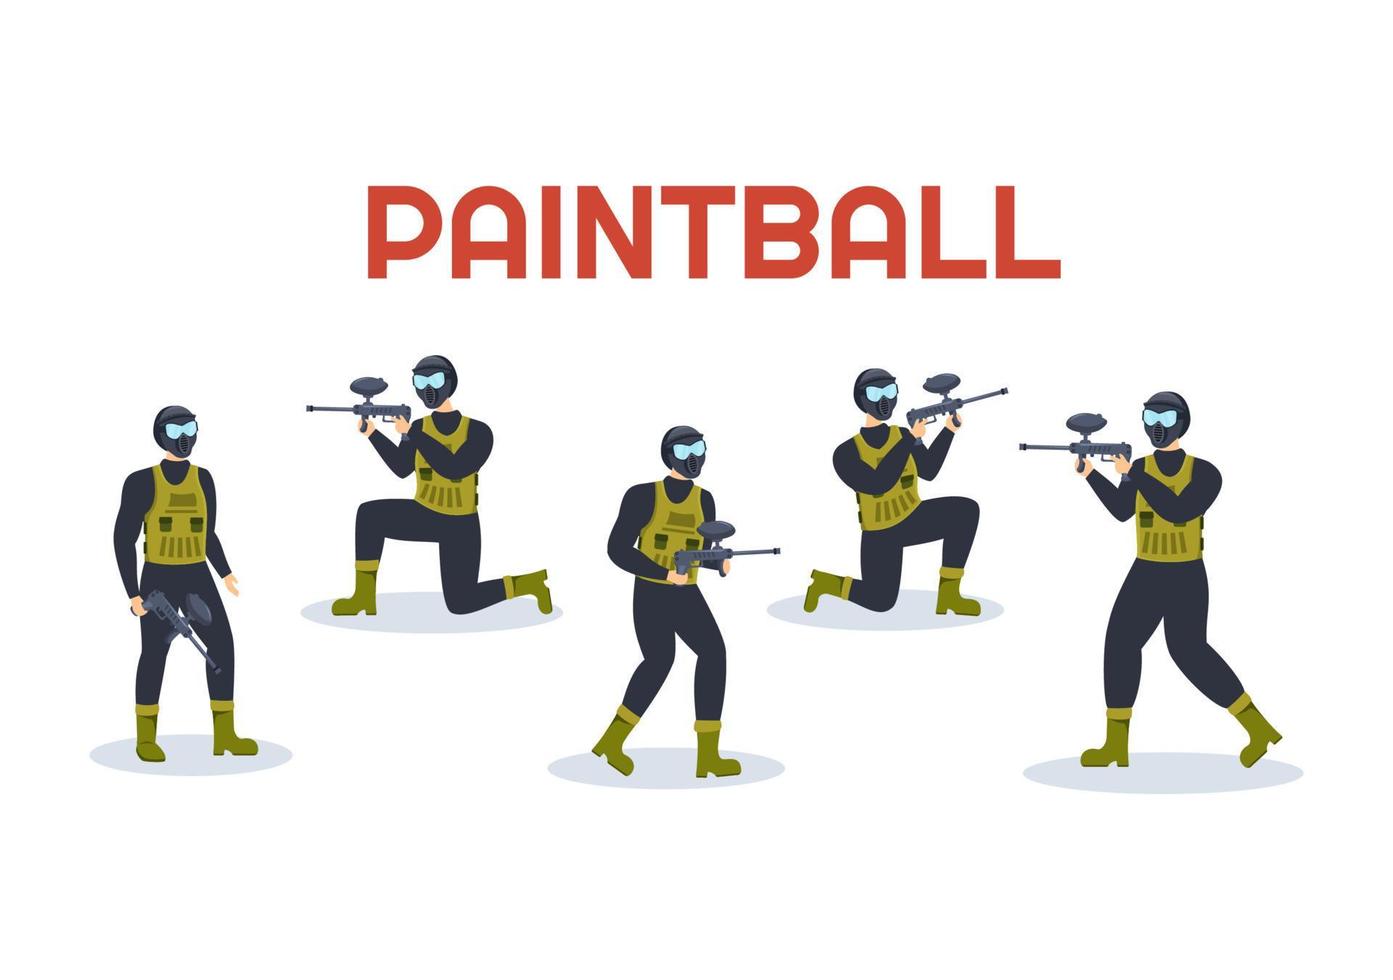 People Playing Paintball of Fighter Player Shooting with Gun Shoot, Aim, Attack in Field Scene in Flat Cartoon Hand Drawn Template Illustration vector